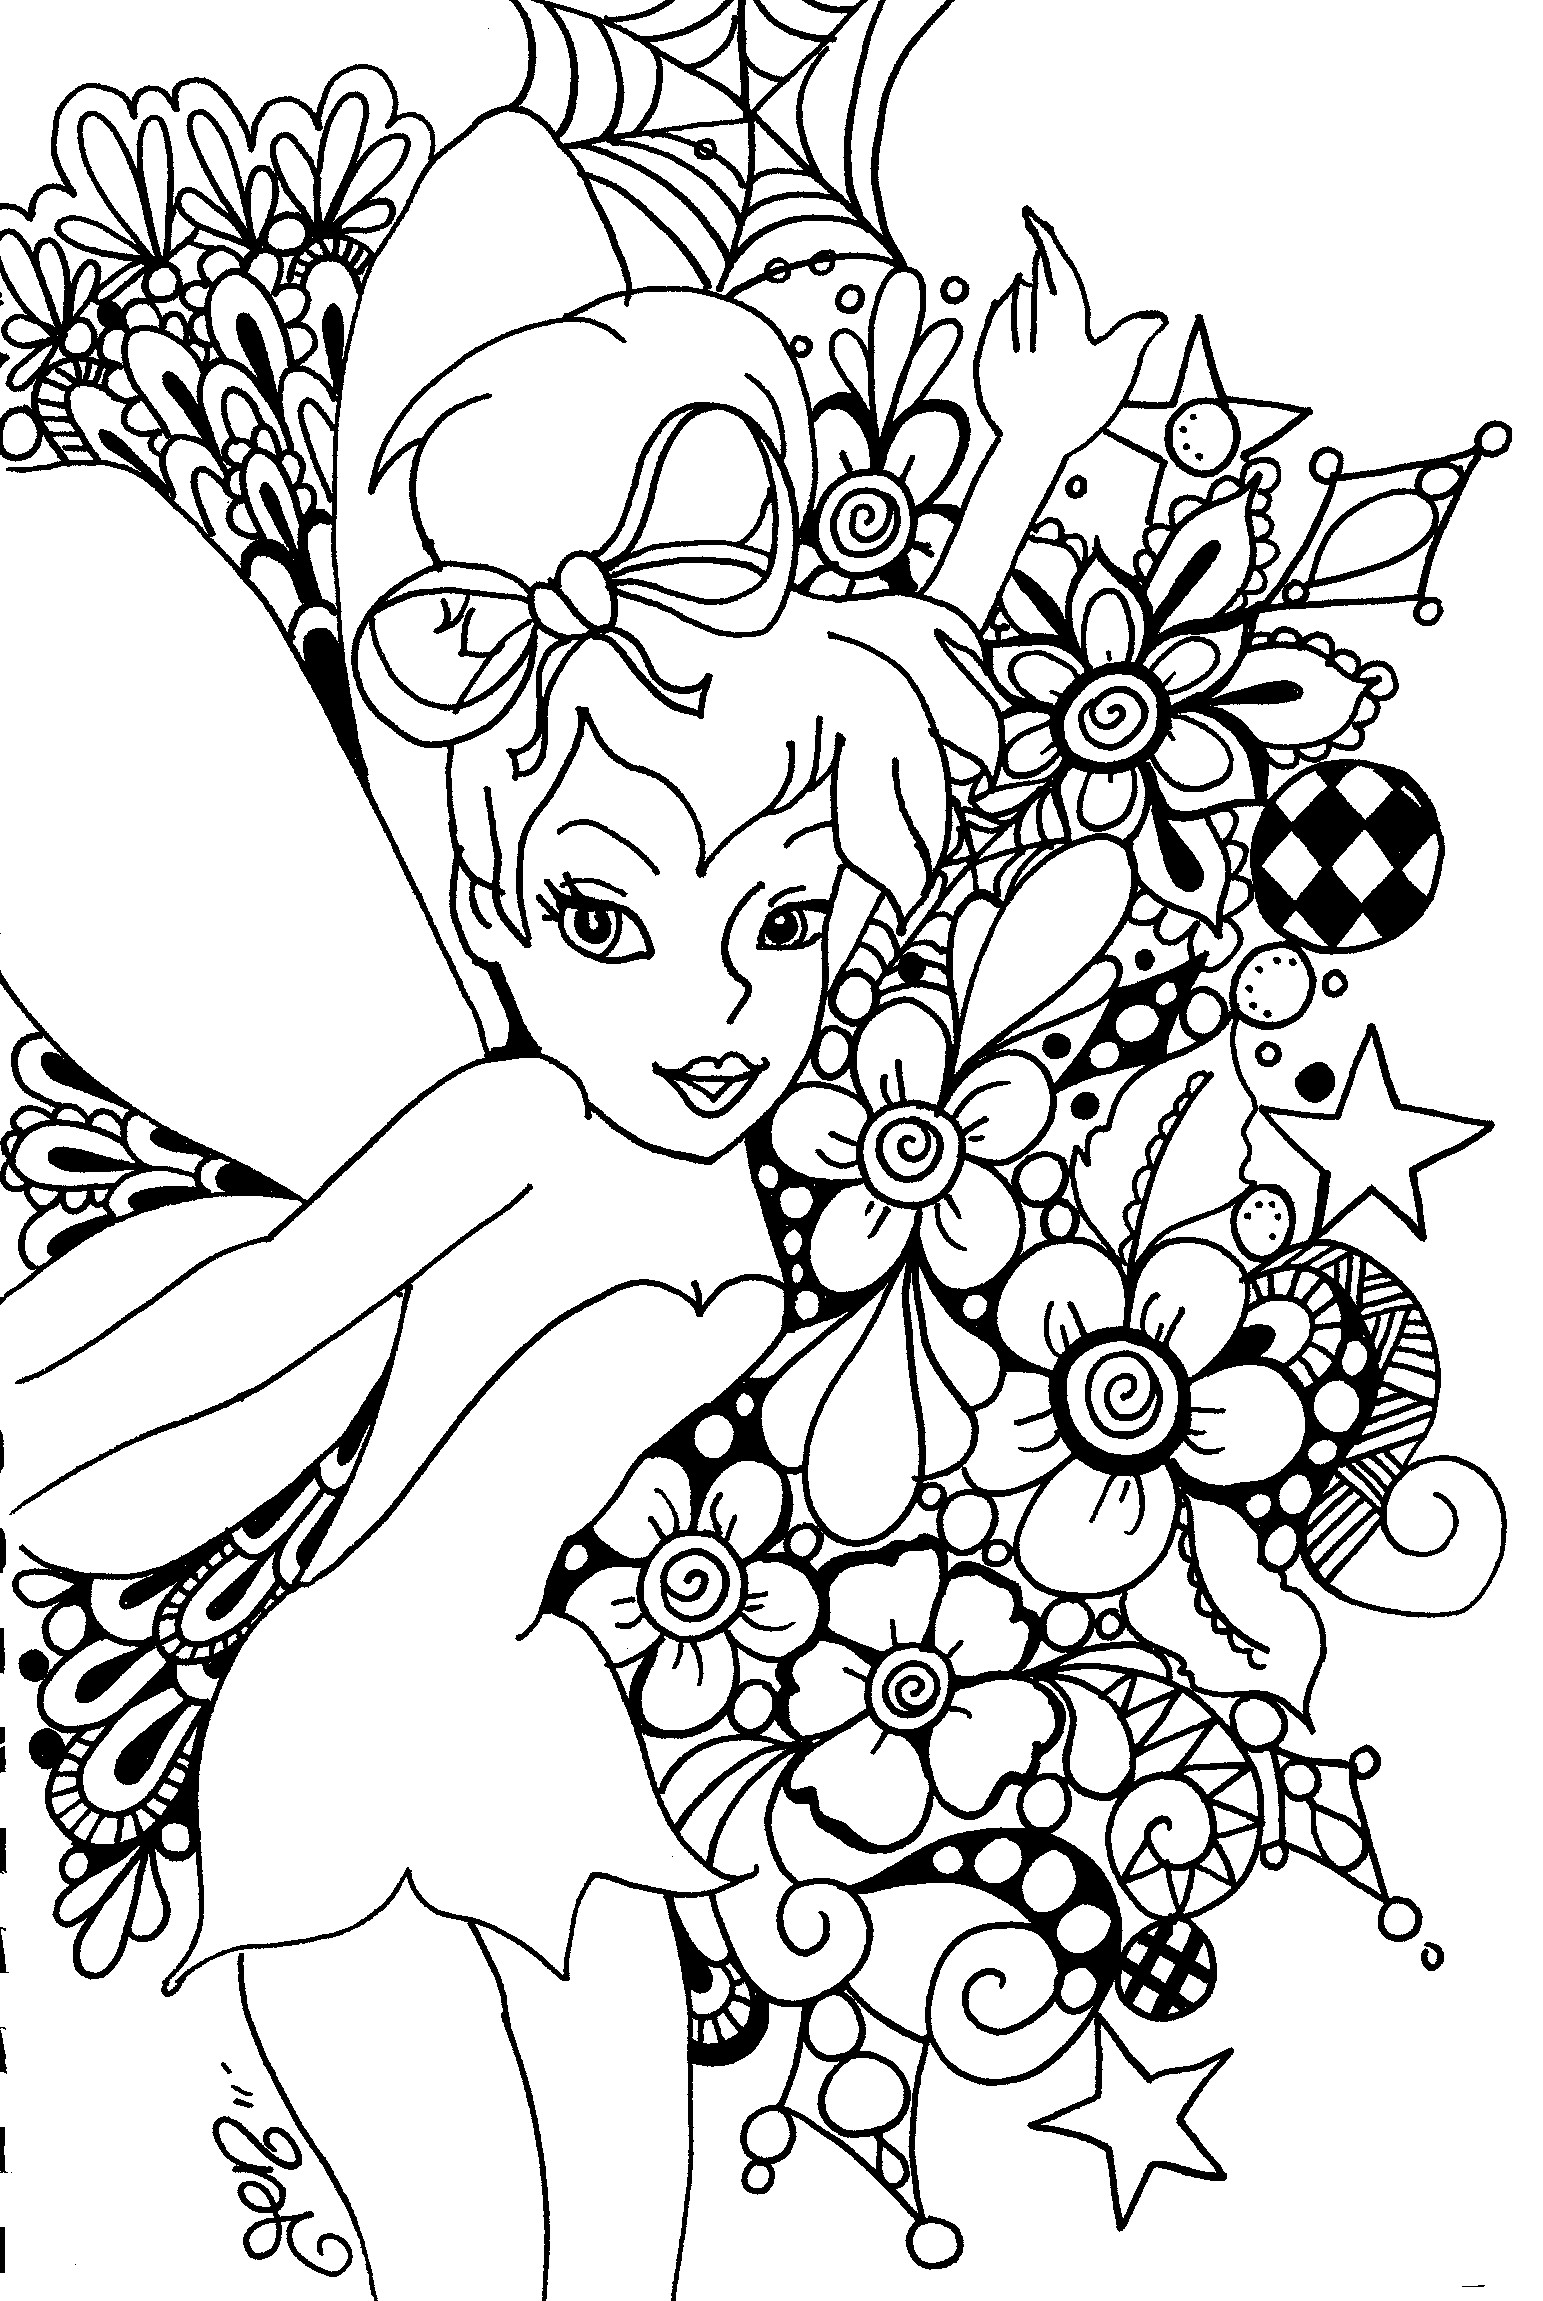 Tinker bell coloring pages to download and print for free